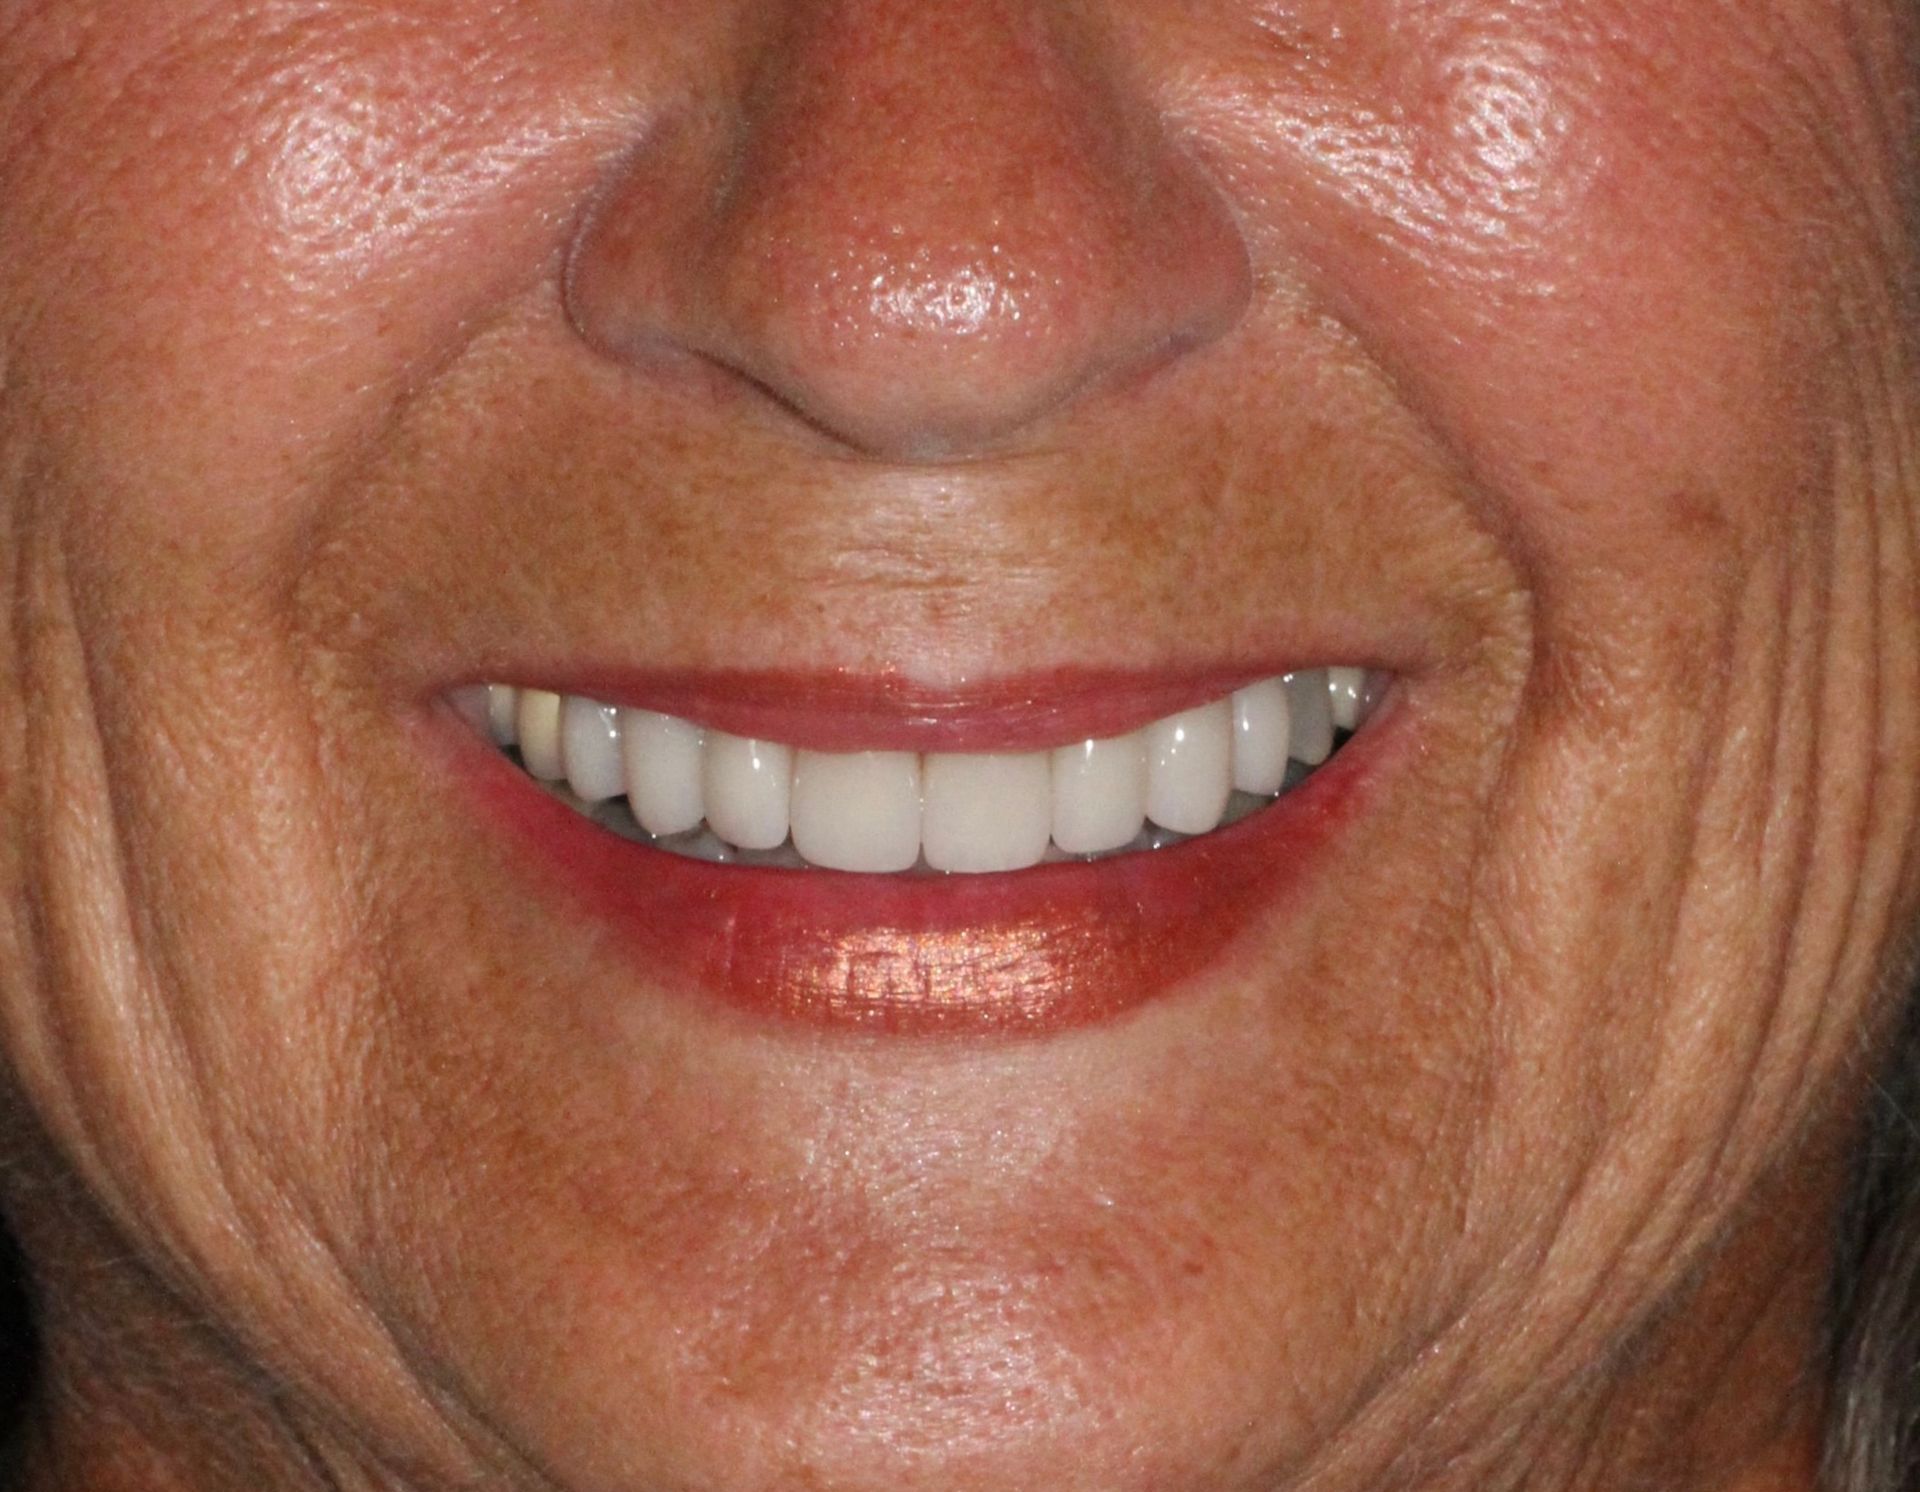 A close up of a woman 's smile with white teeth and red lips.